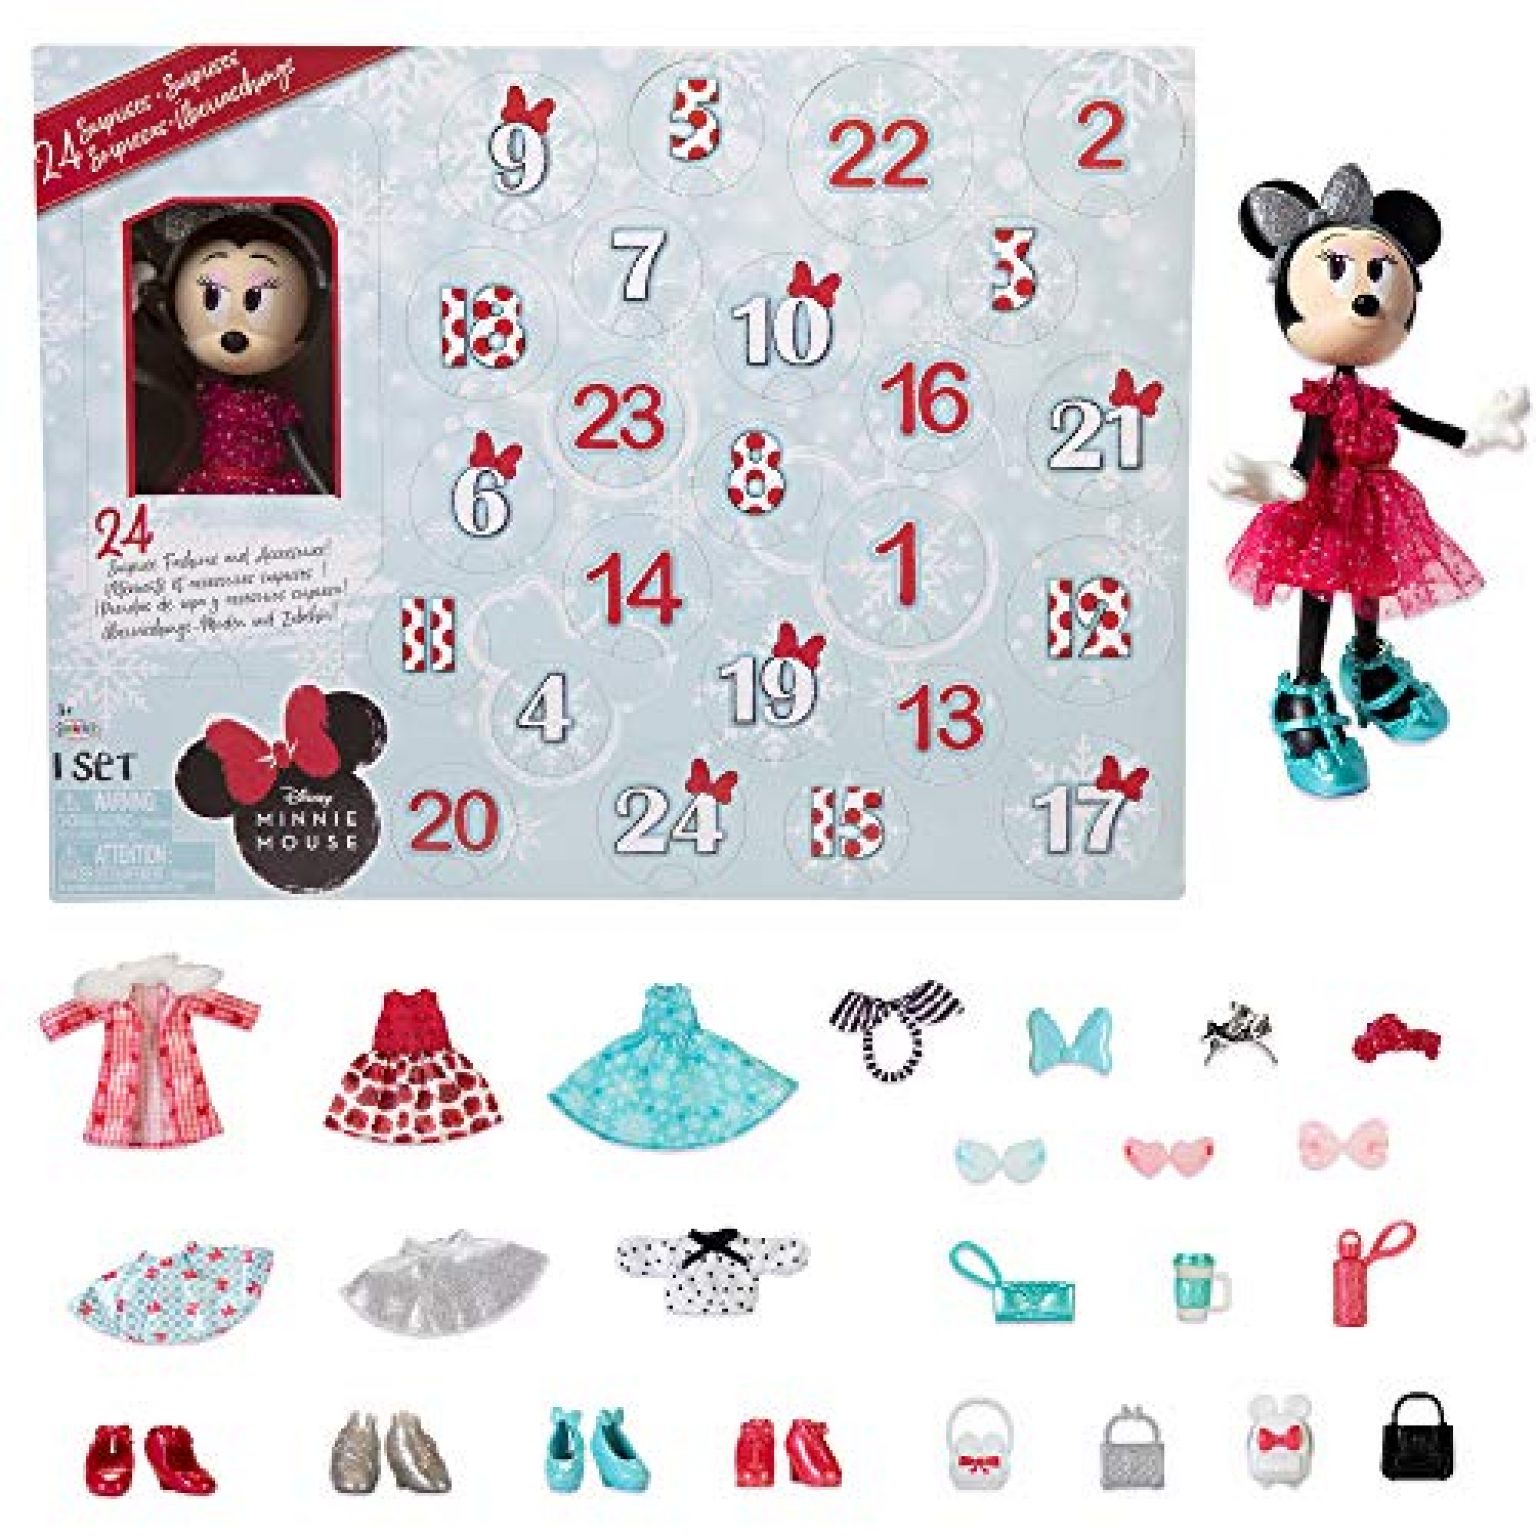 Minnie Mouse Advent Calendar 2020 [Amazon Exclusive] — Deals from